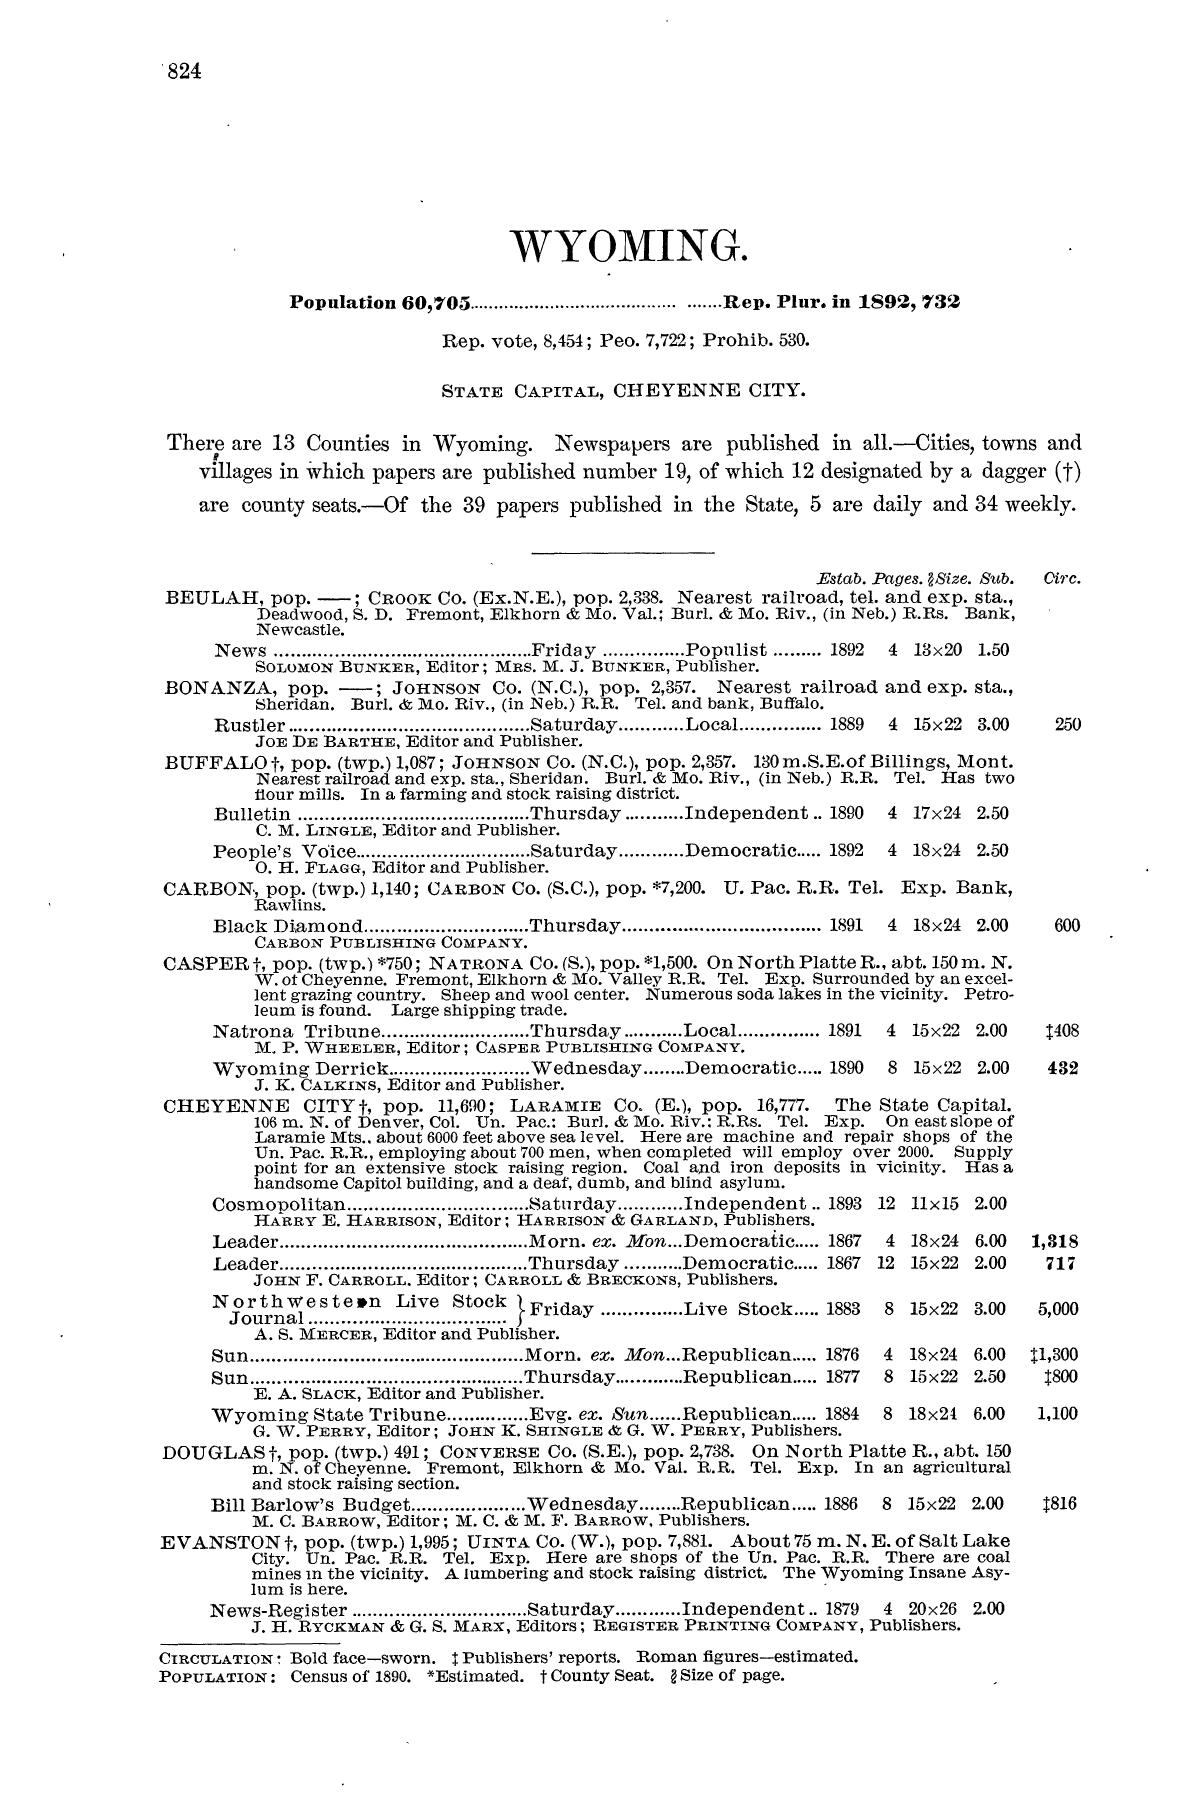 N. W. Ayer & Son's American Newspaper Annual: containing a Catalogue of American Newspapers, a List of All Newspapers of the United States and Canada, 1893-1894, Volume 2
                                                
                                                    824
                                                